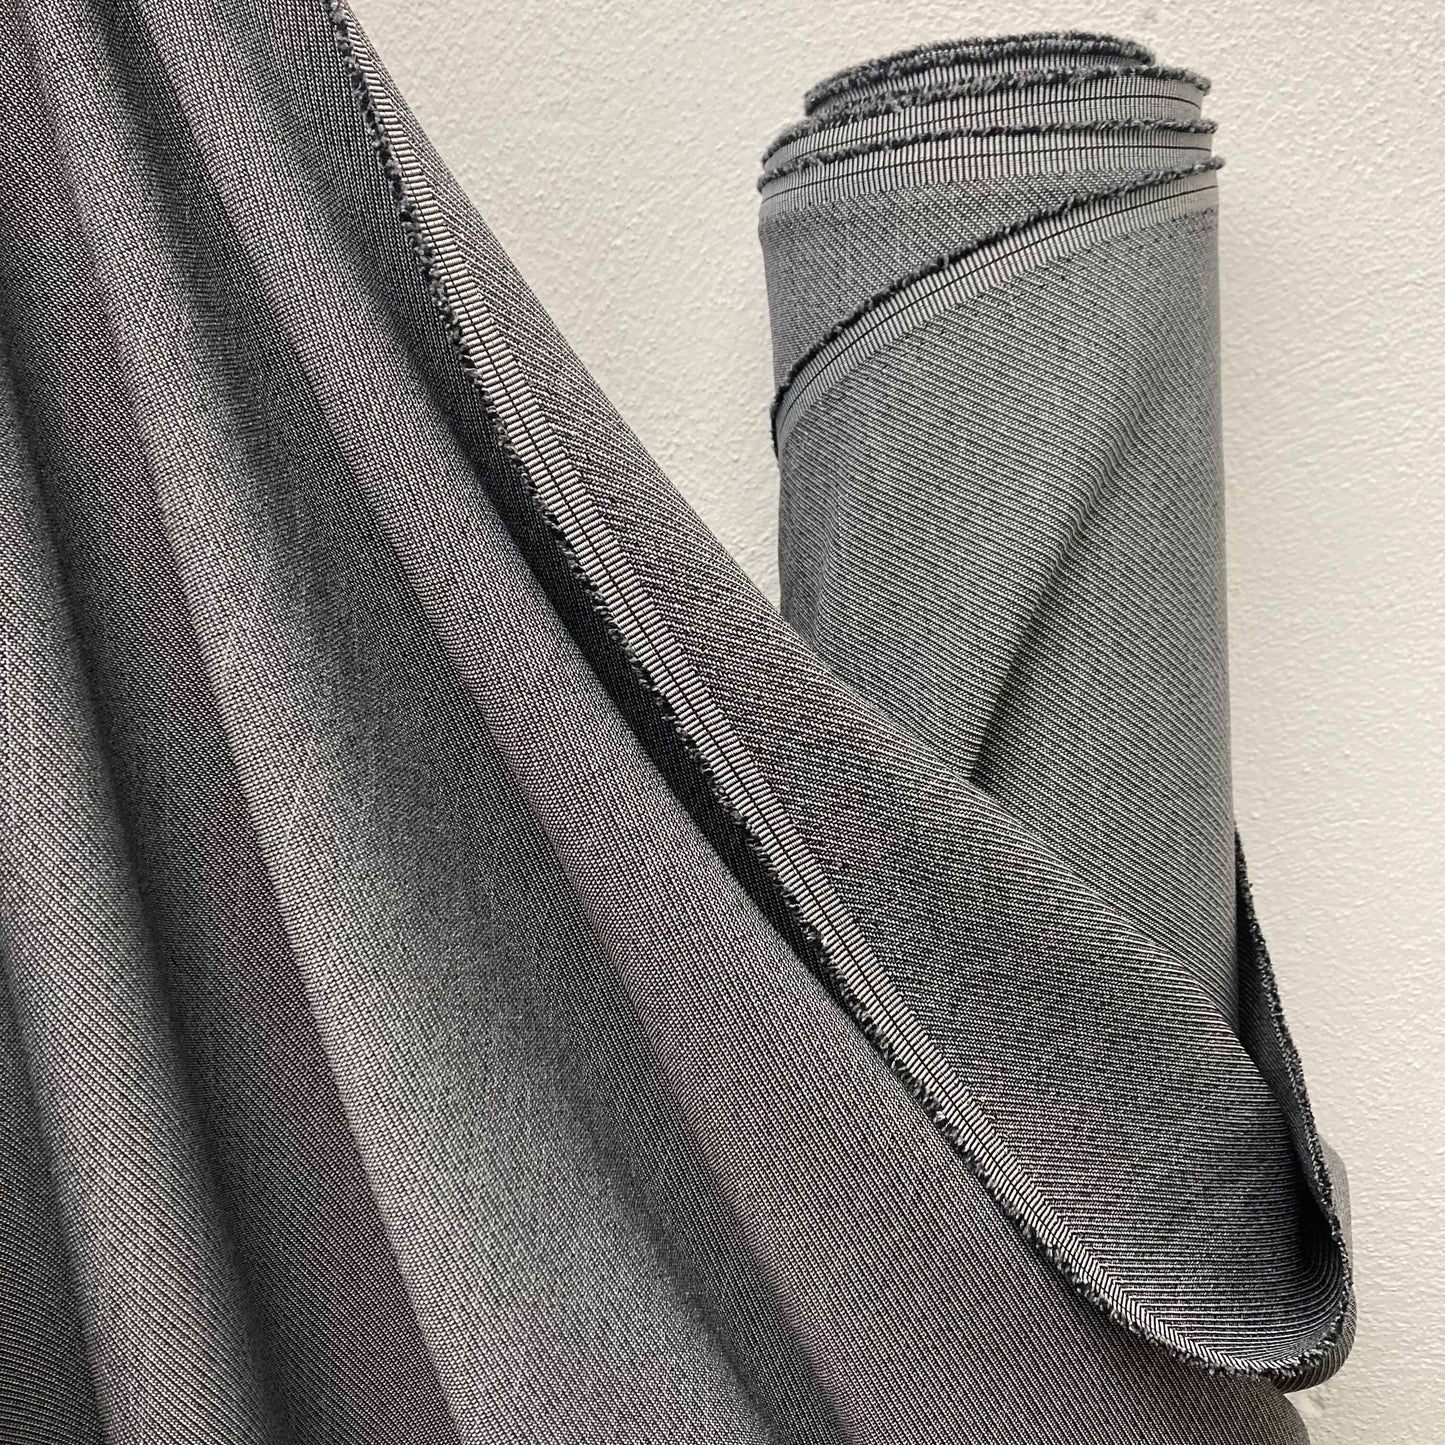 Twill Suiting Fabric - Silver/Grey